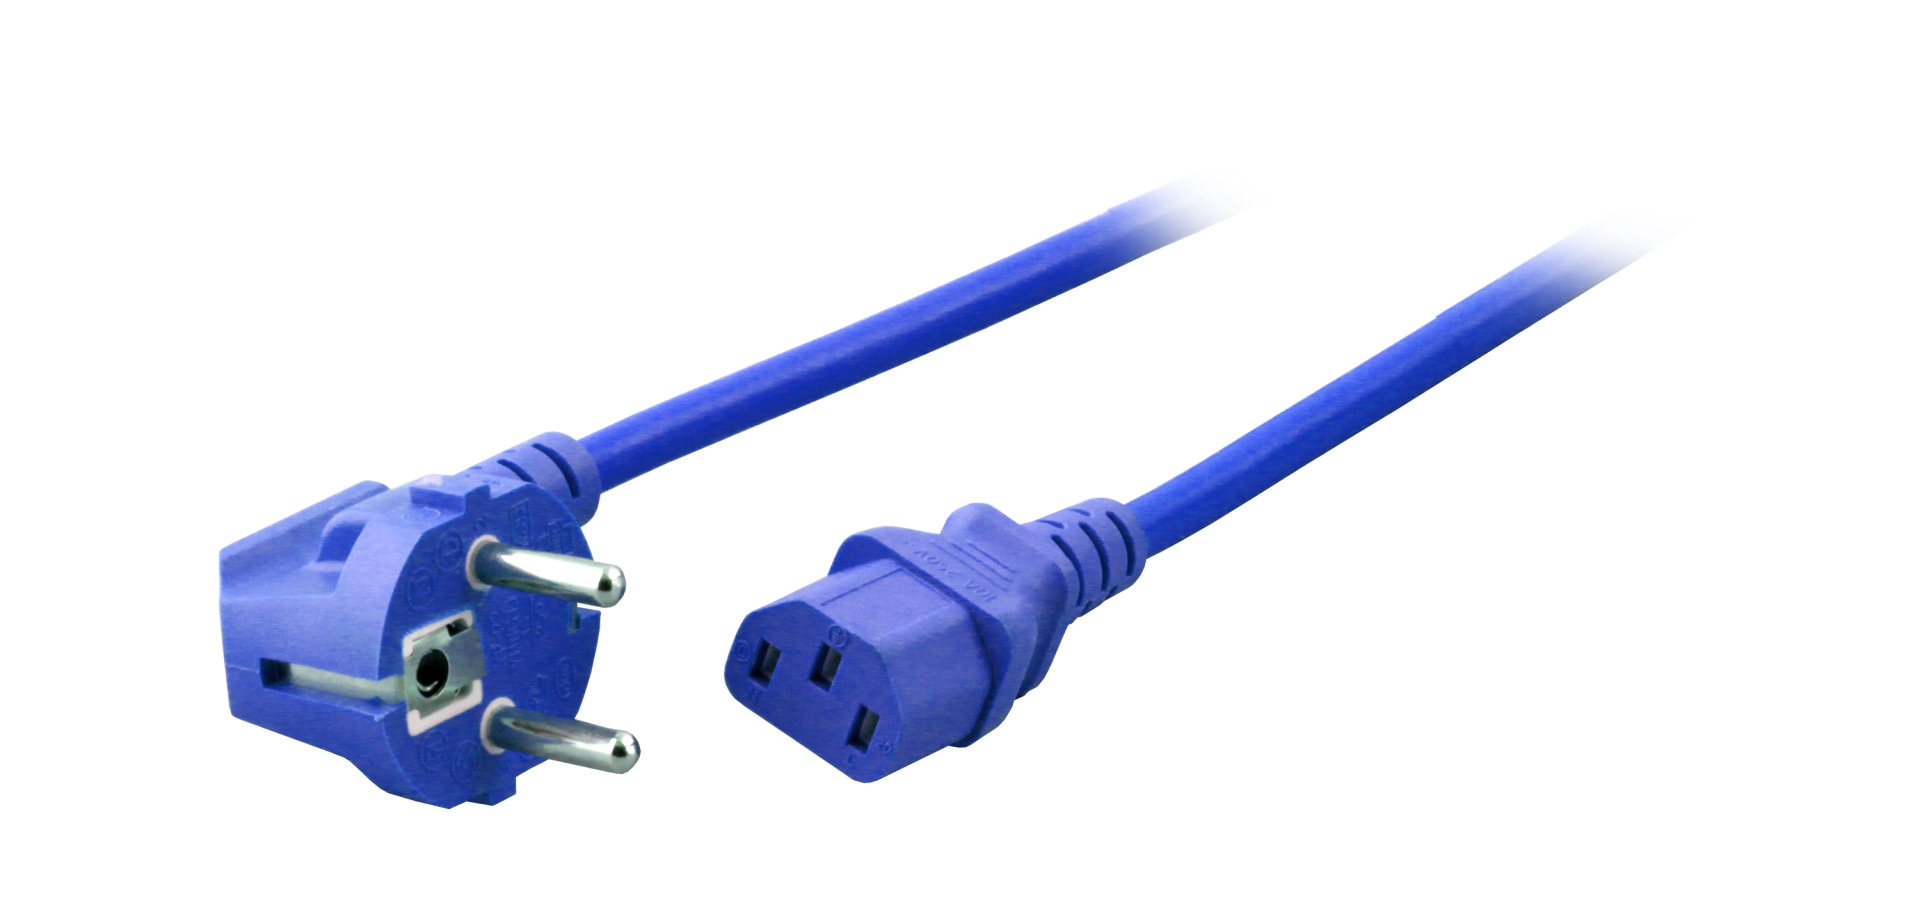 Power Cable CEE7/7 90° - C13 180°, Blue, 3.0 m, 3 x 1.00 mm²